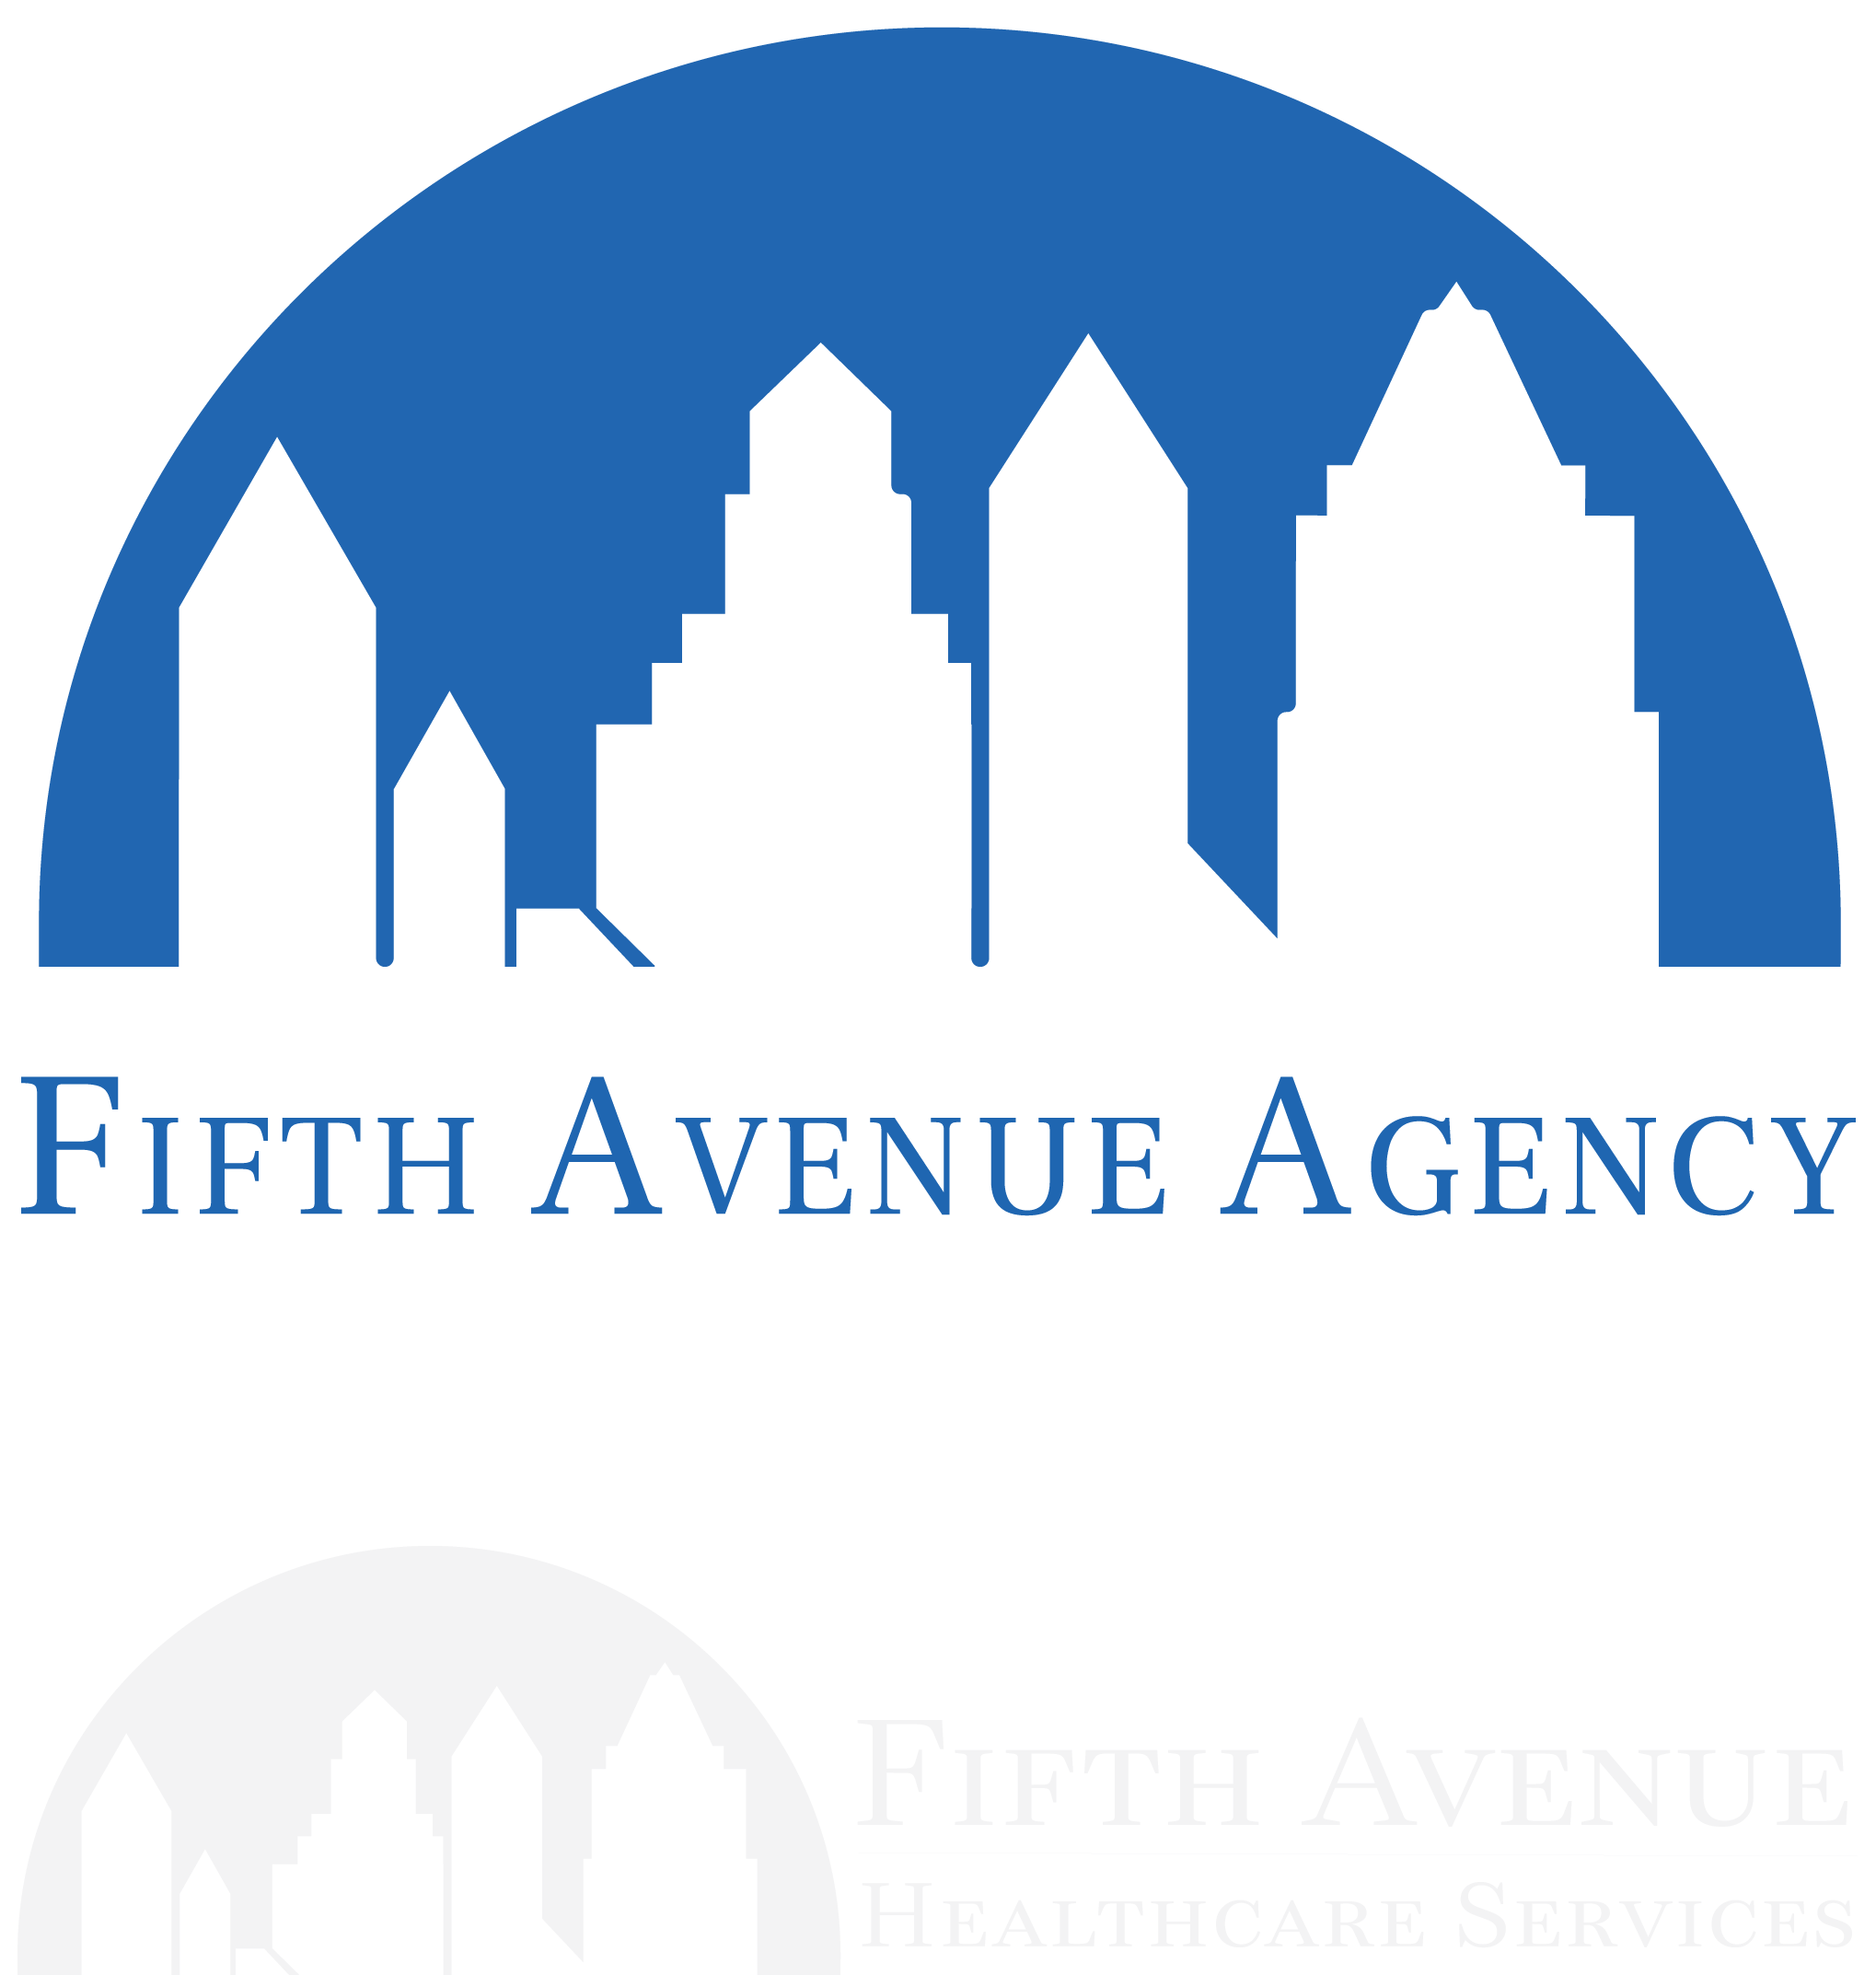 Fifth Avenue Agency Member of Fifth Avenue Healthcare Services